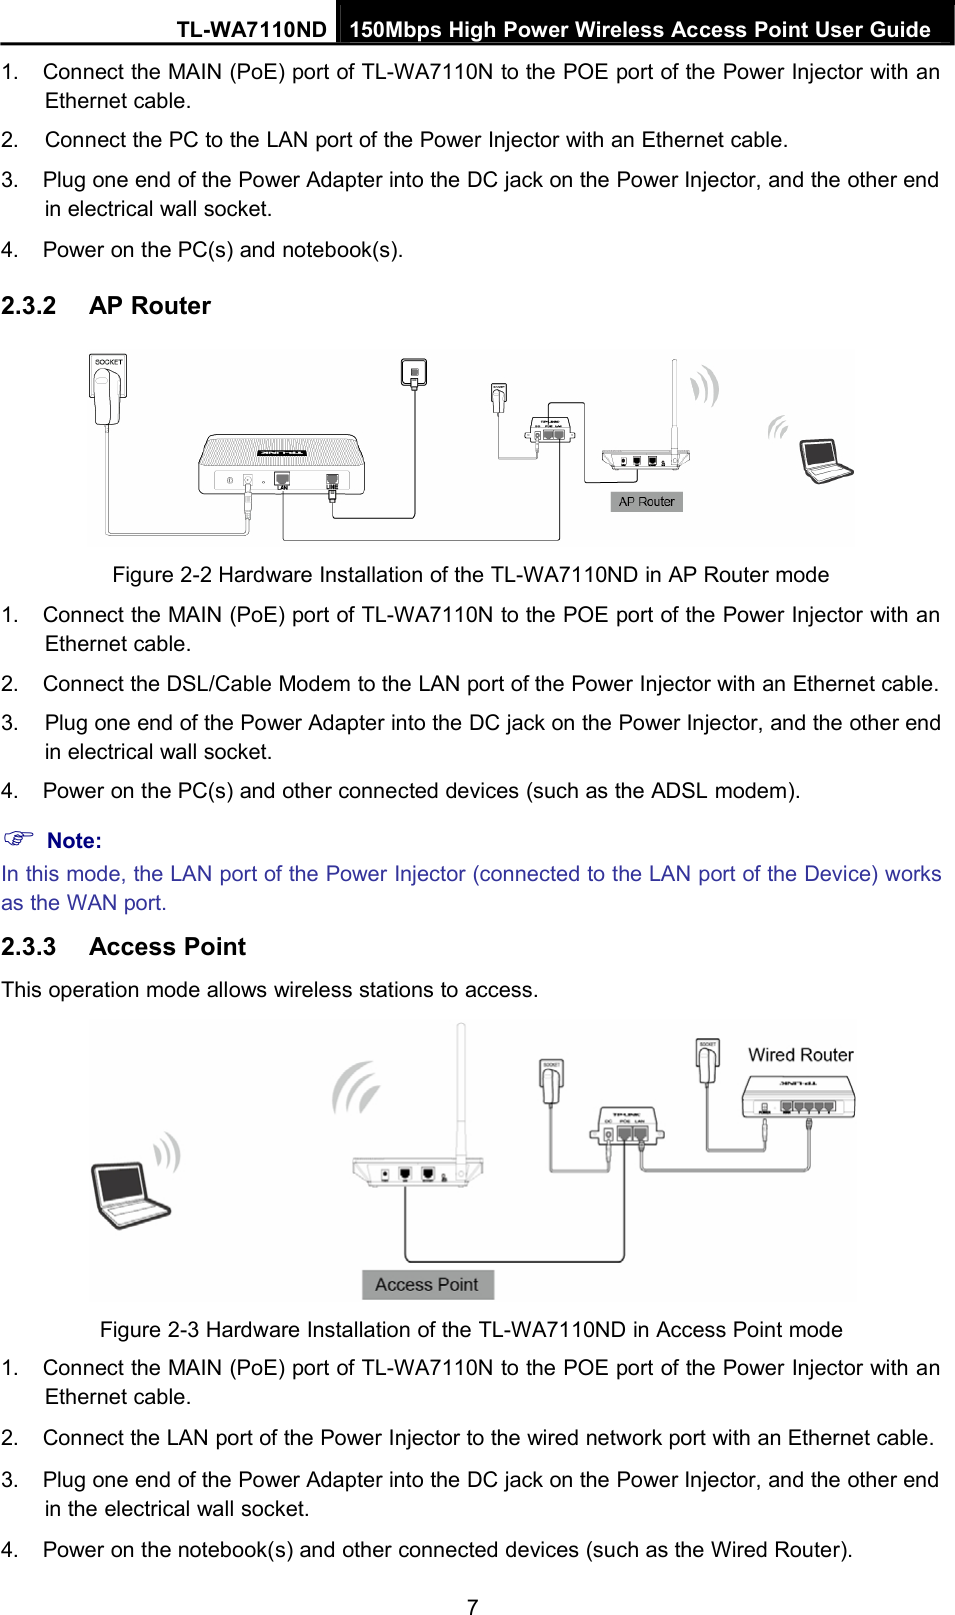 TL-WA7110ND 150Mbps High Power Wireless Access Point User Guide1. Connect the MAIN (PoE) port of TL-WA7110N to the POE port of the Power Injector with anEthernet cable.2. Connect the PC to the LAN port of the Power Injector with an Ethernet cable.3. Plug one end of the Power Adapter into the DC jack on the Power Injector, and the other endin electrical wall socket.4. Power on the PC(s) and notebook(s).2.3.2 AP RouterFigure 2-2 Hardware Installation of the TL-WA7110ND in AP Router mode1. Connect the MAIN (PoE) port of TL-WA7110N to the POE port of the Power Injector with anEthernet cable.2. Connect the DSL/Cable Modem to the LAN port of the Power Injector with an Ethernet cable.3. Plug one end of the Power Adapter into the DC jack on the Power Injector, and the other endin electrical wall socket.4. Power on the PC(s) and other connected devices (such as the ADSL modem).Note:In this mode, the LAN port of the Power Injector (connected to the LAN port of the Device) worksas the WAN port.2.3.3 Access PointThis operation mode allows wireless stations to access.Figure 2-3 Hardware Installation of the TL-WA7110ND in Access Point mode1. Connect the MAIN (PoE) port of TL-WA7110N to the POE port of the Power Injector with anEthernet cable.2. Connect the LAN port of the Power Injector to the wired network port with an Ethernet cable.3. Plug one end of the Power Adapter into the DC jack on the Power Injector, and the other endin the electrical wall socket.4. Power on the notebook(s) and other connected devices (such as the Wired Router).7